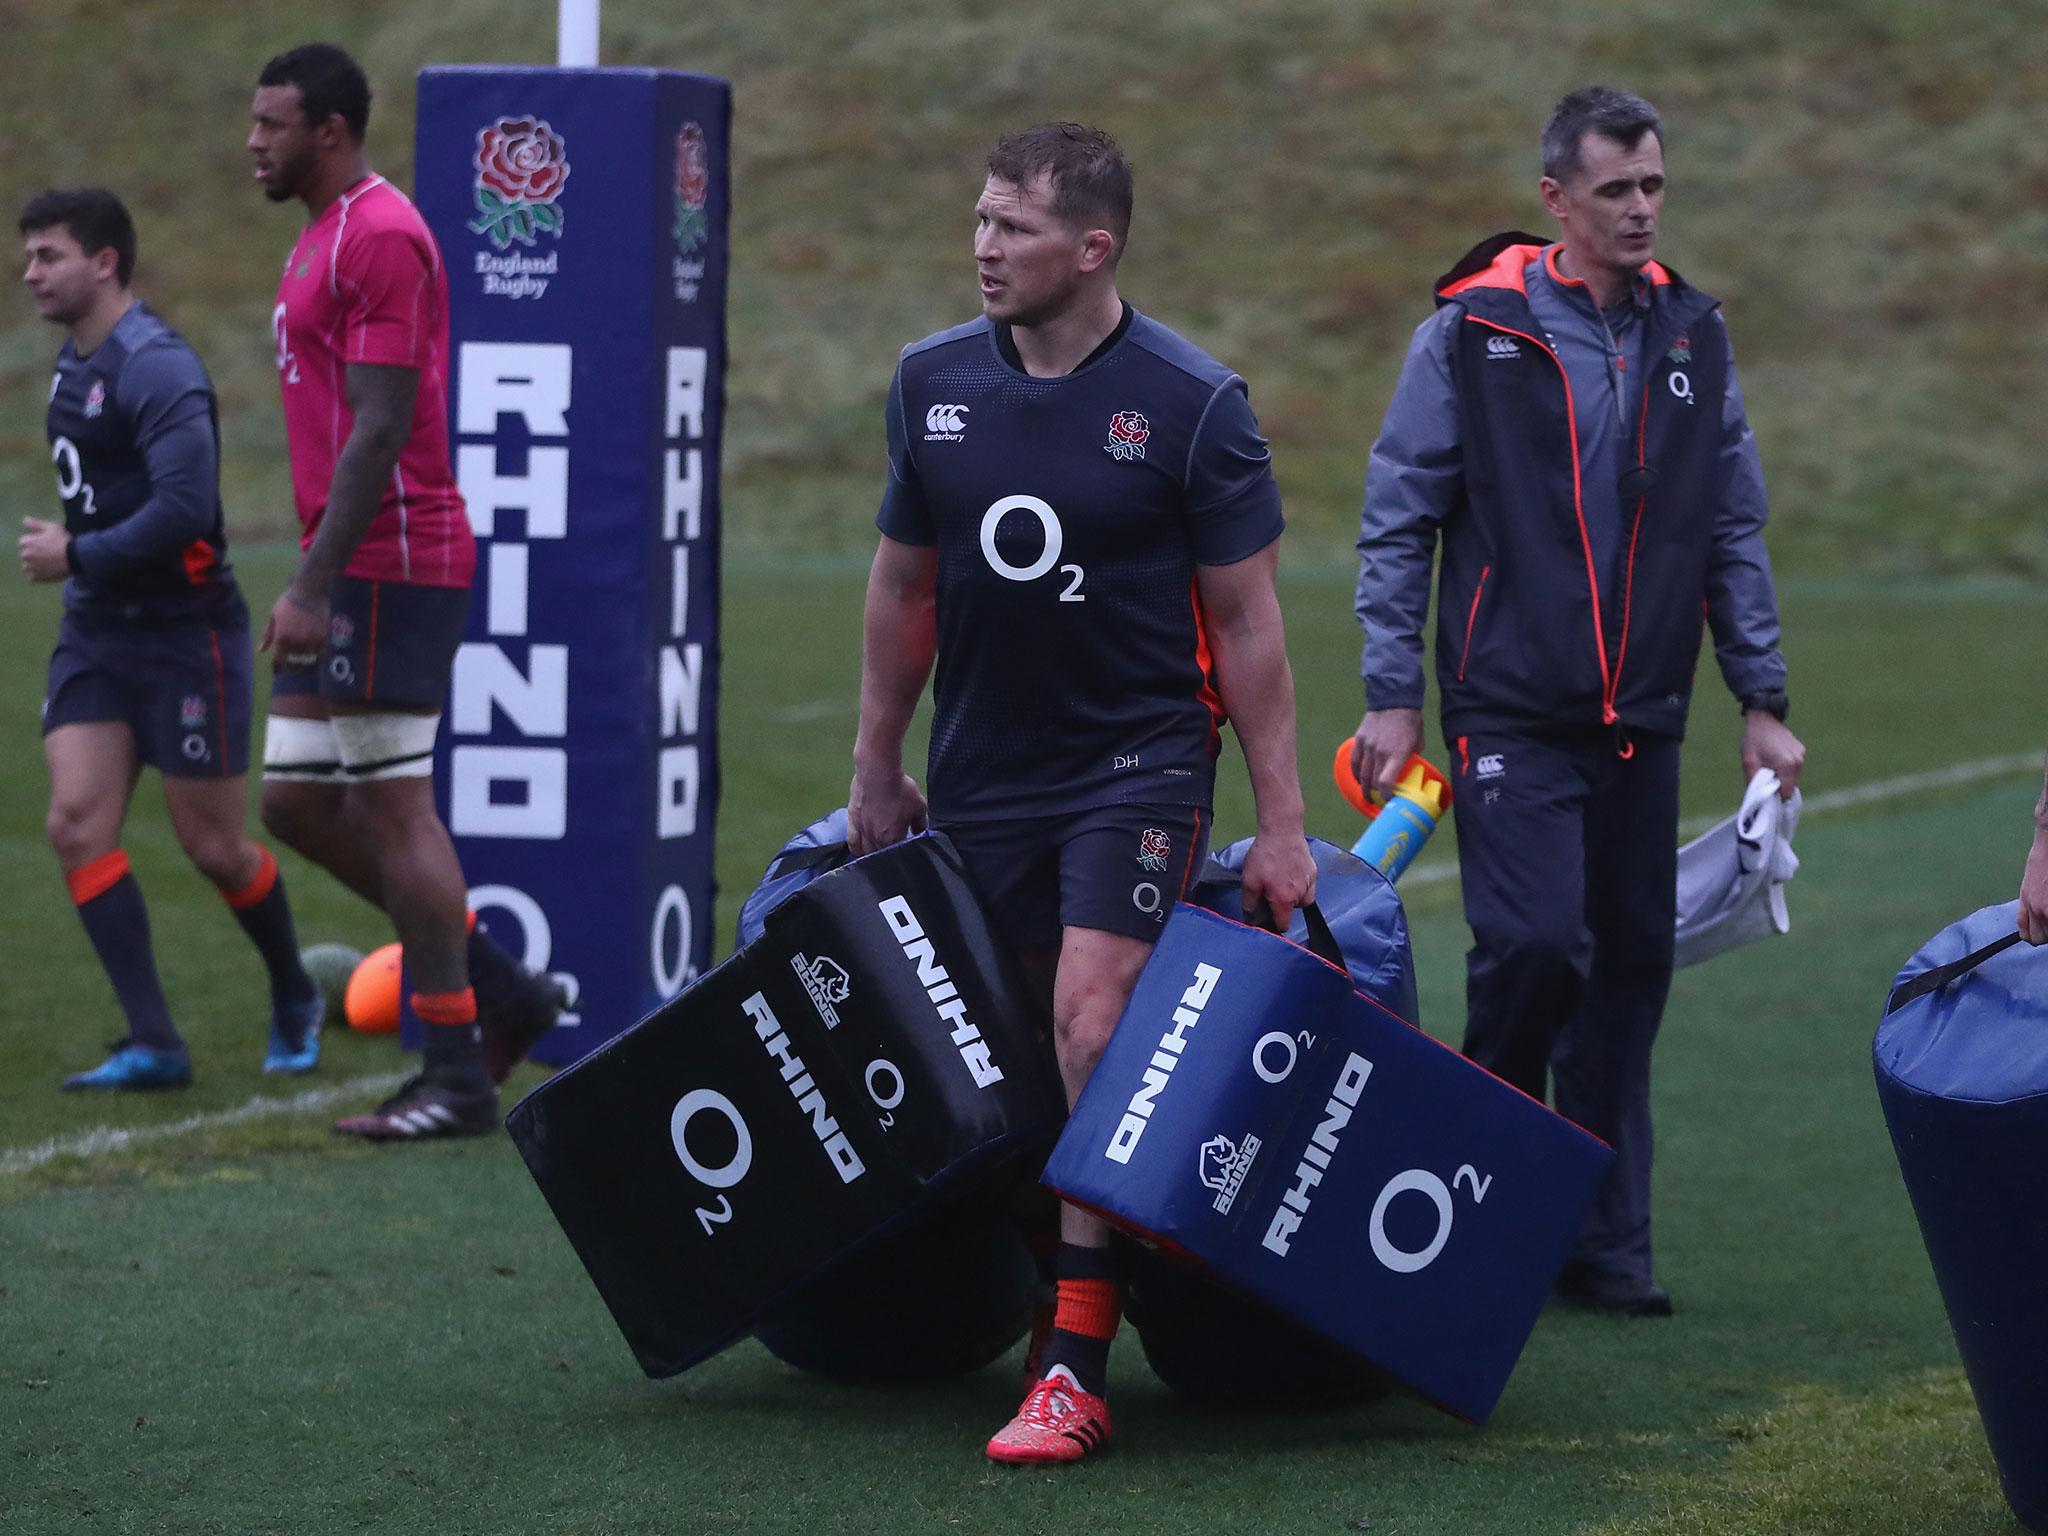 Dylan Hartley faces the biggest test of his reign as England captain this year